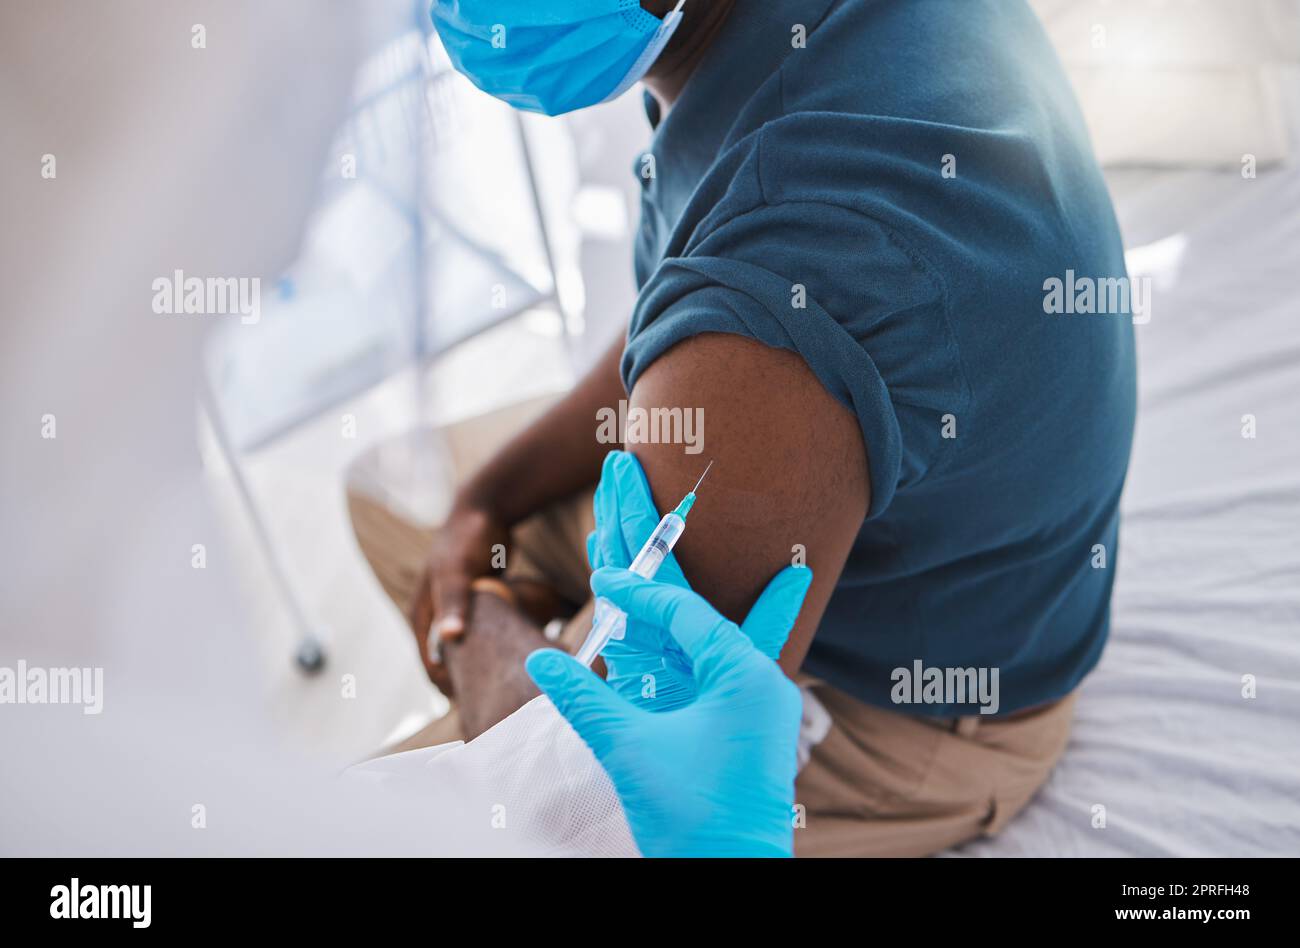 Vaccine, injection or medicine cure for covid, monkeypox and ebola with trust doctor, healthcare or medical worker. Physician in hazmat suit with wellness treatment for patient arm at hospital clinic Stock Photo